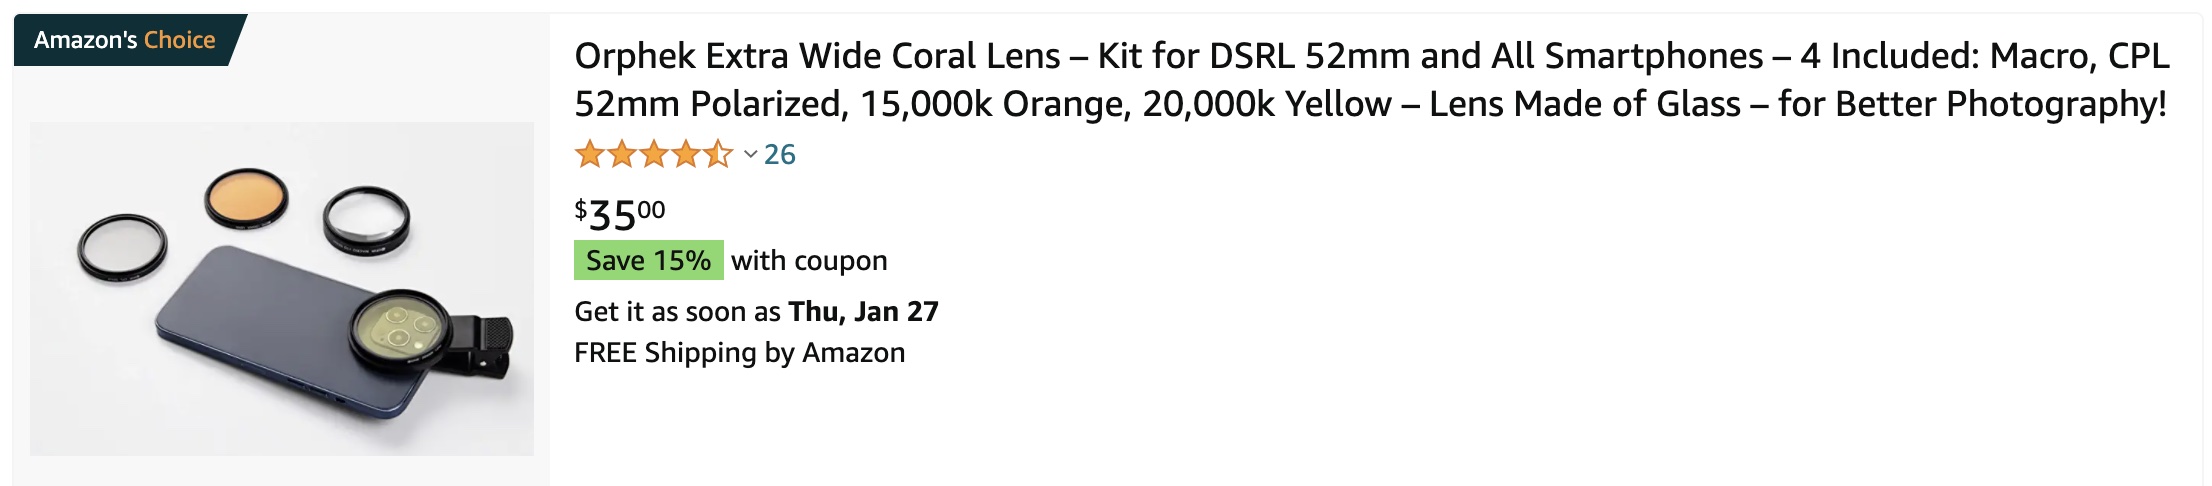 buy on amazon Orphek Extra Wide Coral Lens